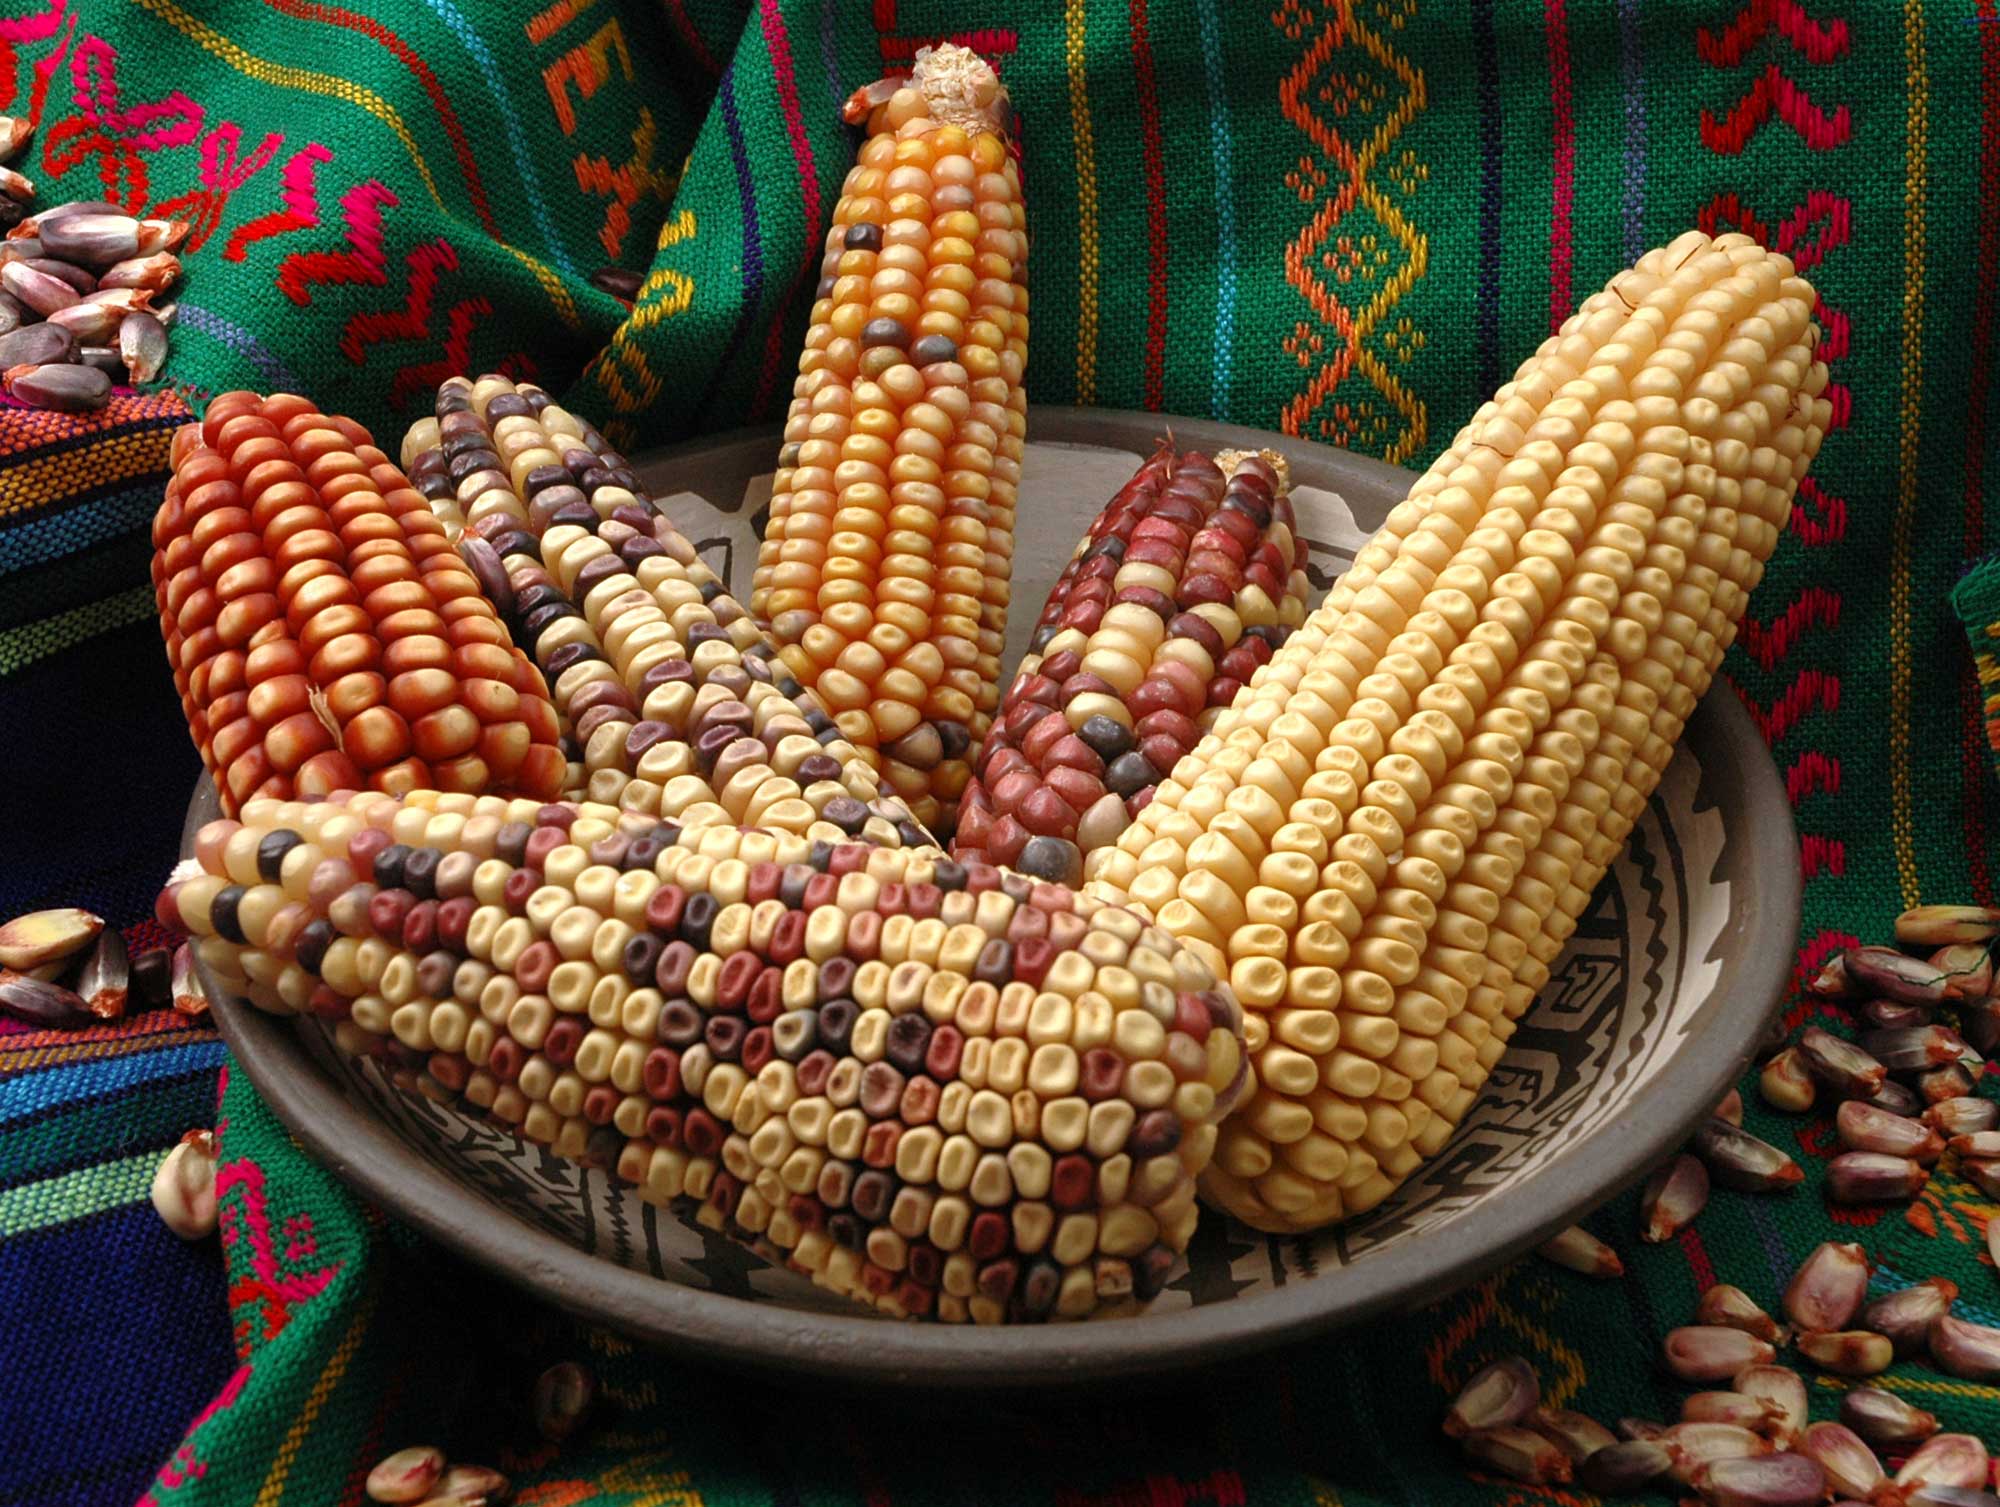 Photograph of ears of maize of the Conico Norteño landrace from Mexico. The photo shows six ears of maize in a bowl tha tis sitting on traditional textiles sprinkled with maize kernels. The ears are all different from one another, varying from light yellow, to orange, to multicolored.